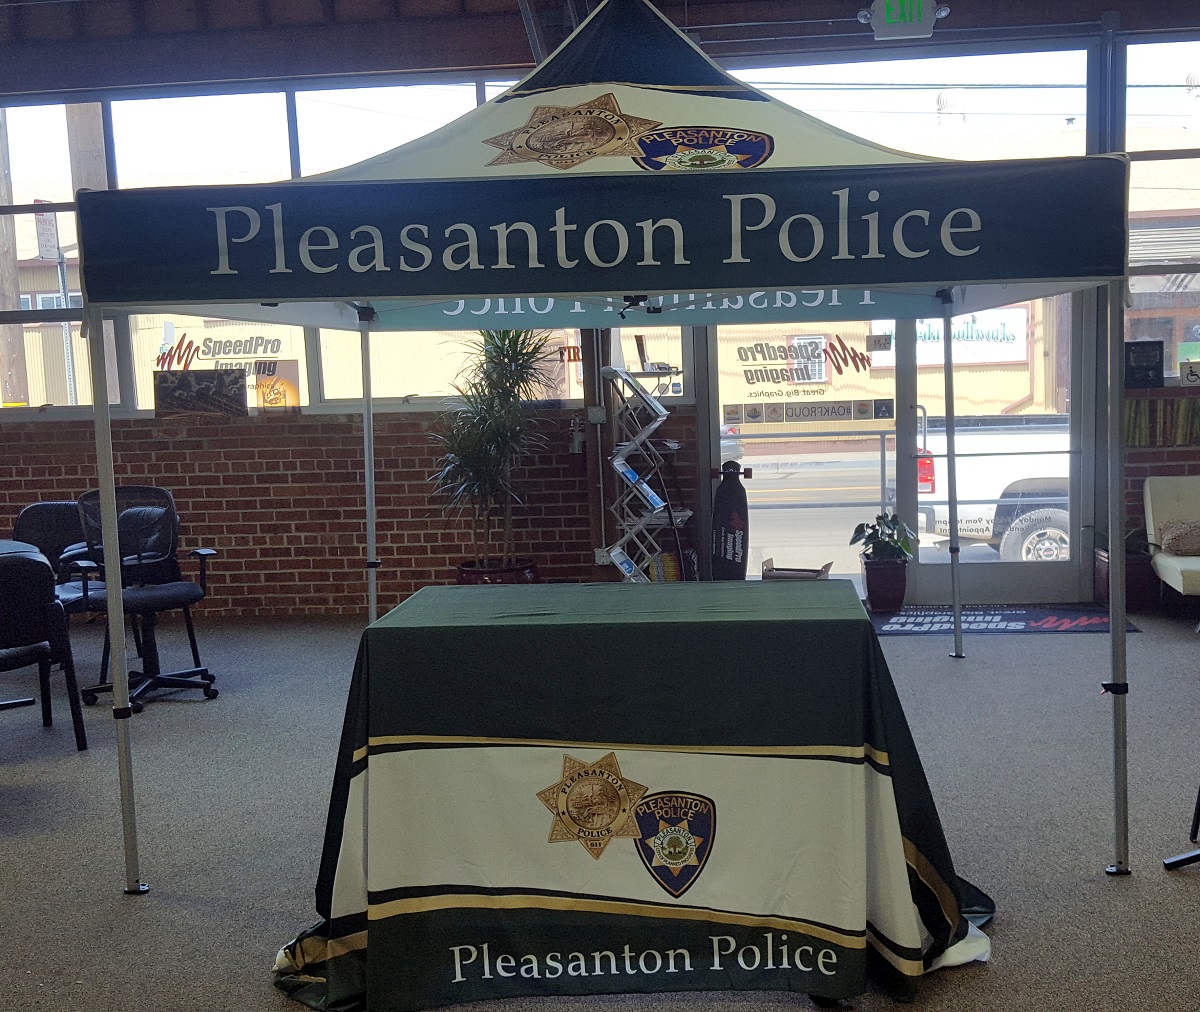 A custom printed table runner and tent made by Speed Pro Images for the Pleasanton Police department.